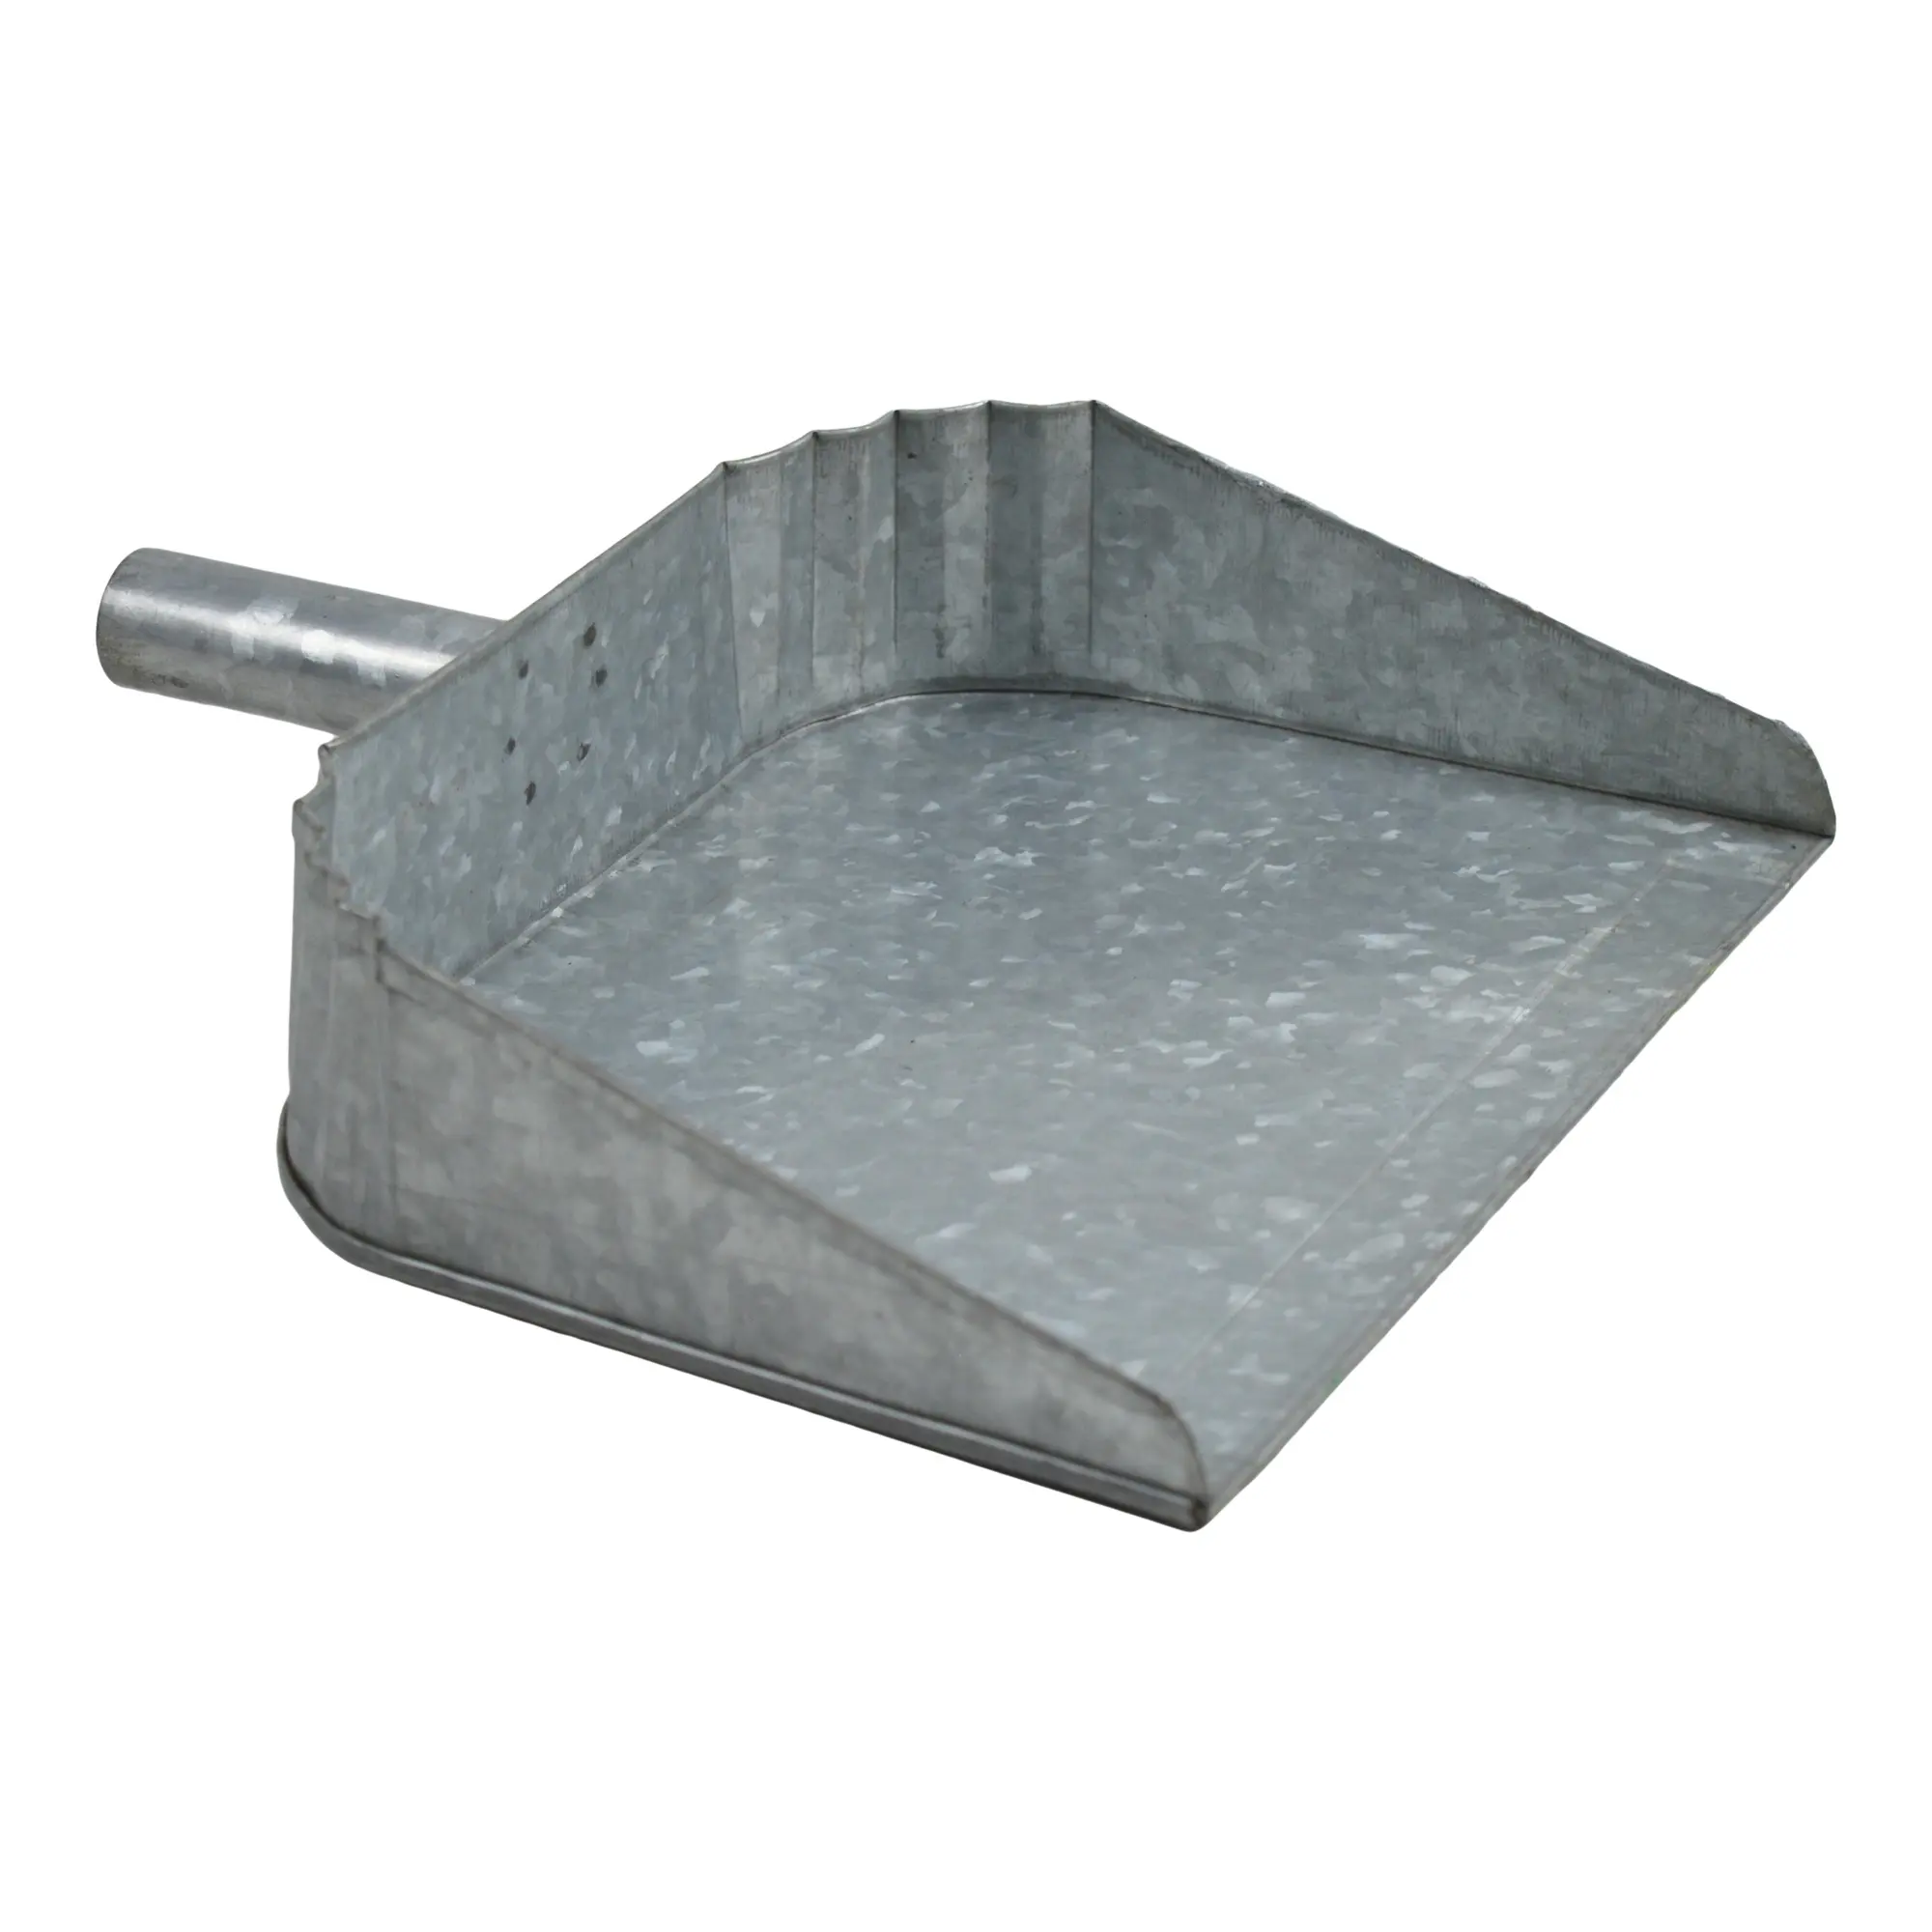 Original Quality Iron Metal Design Dust Pan Best For Home And Garden Dust Cleaning Design Galvanized Dust Pan